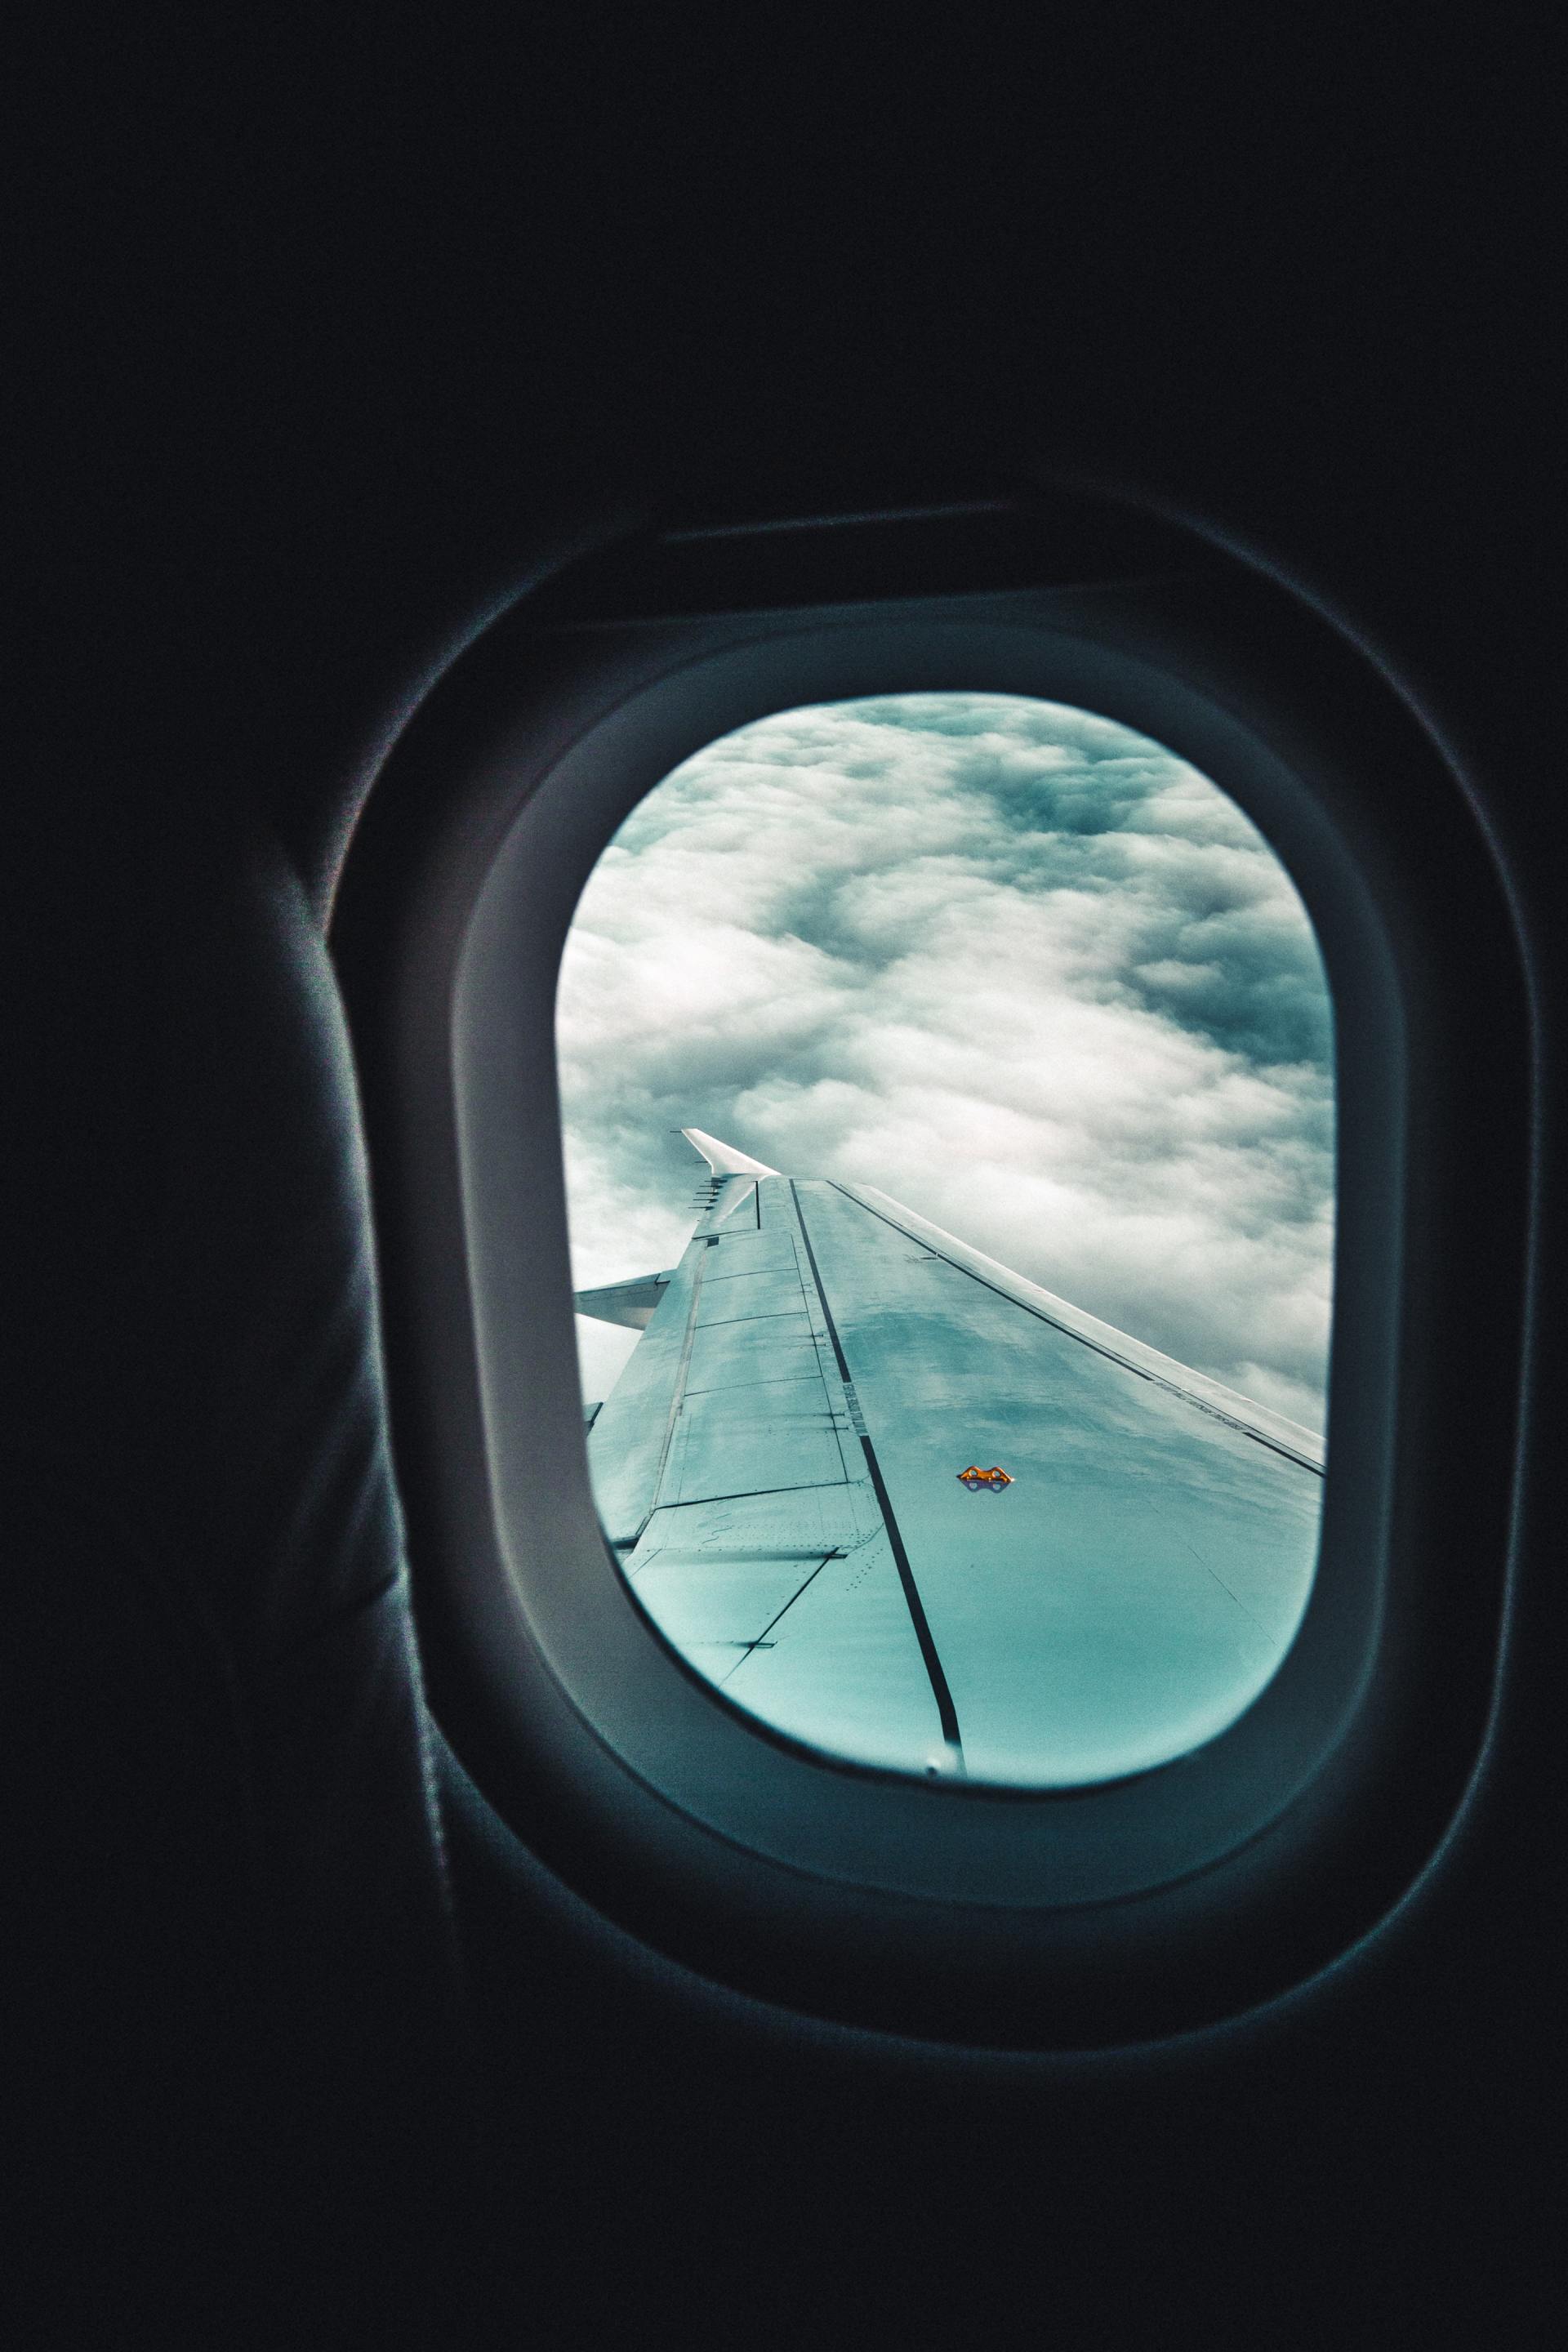 The view out the window of a plane and looking at a plane wing